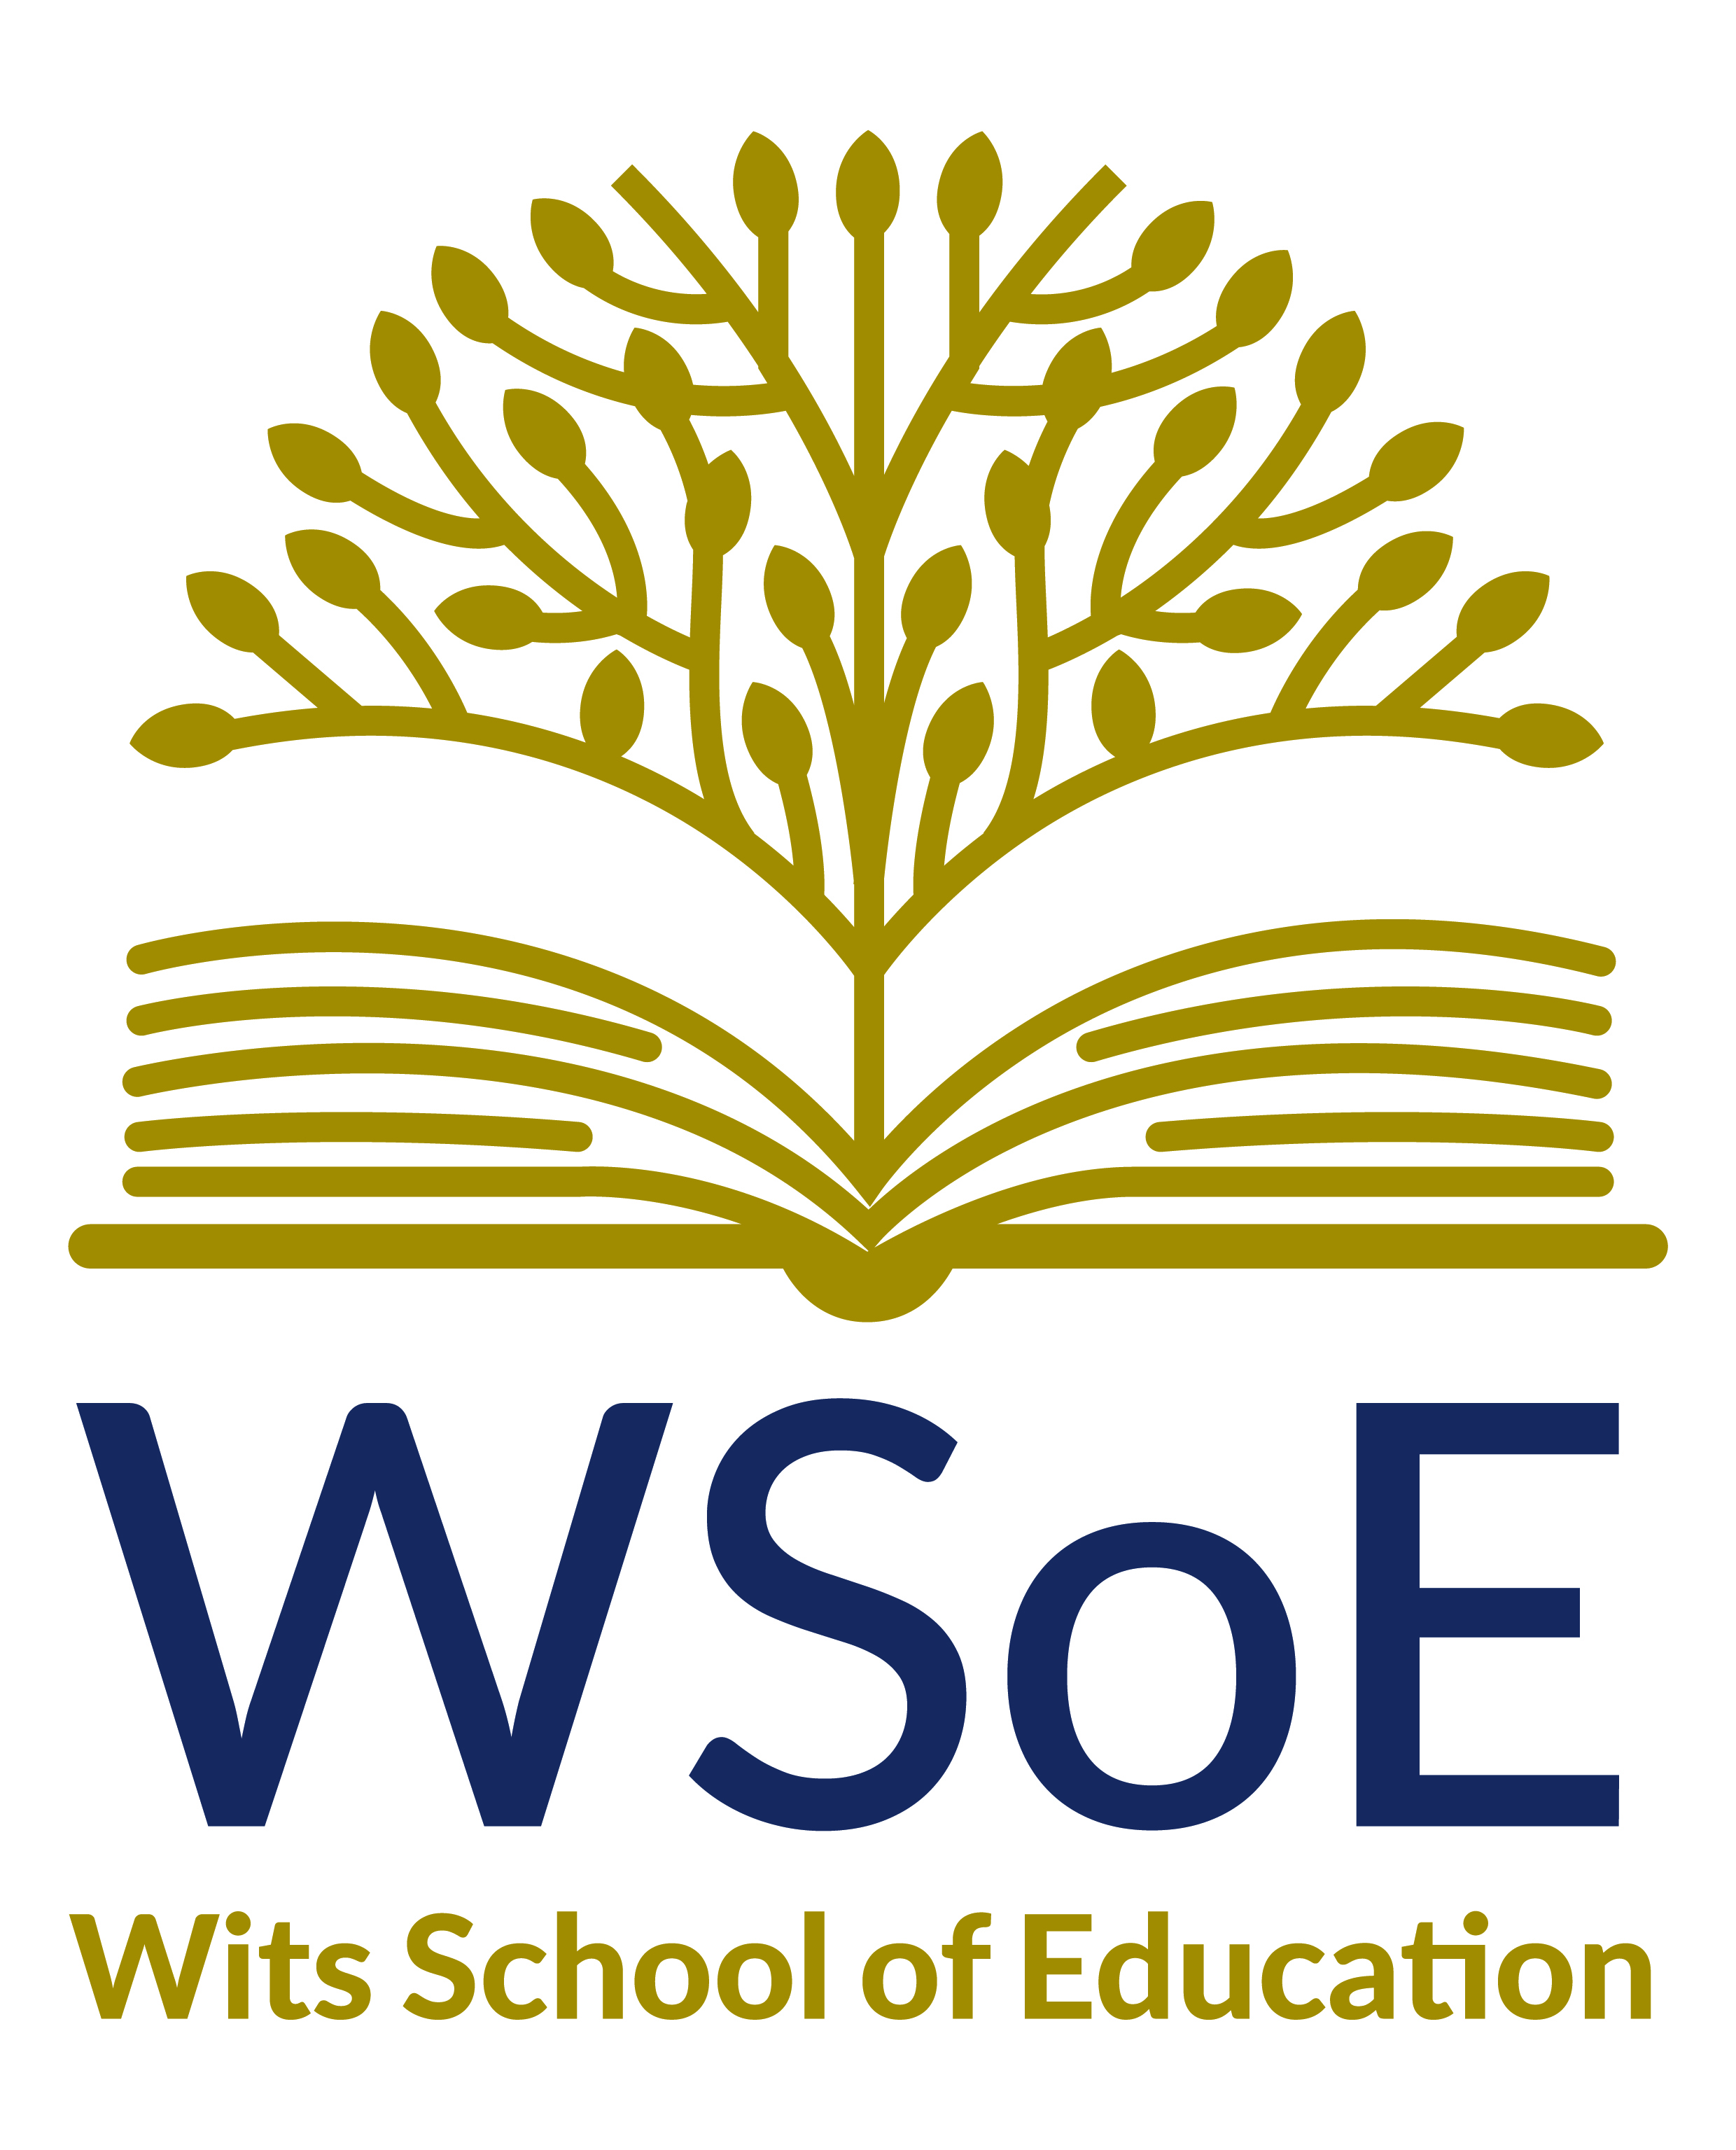 Logo for Wits School of Education showing book and tree